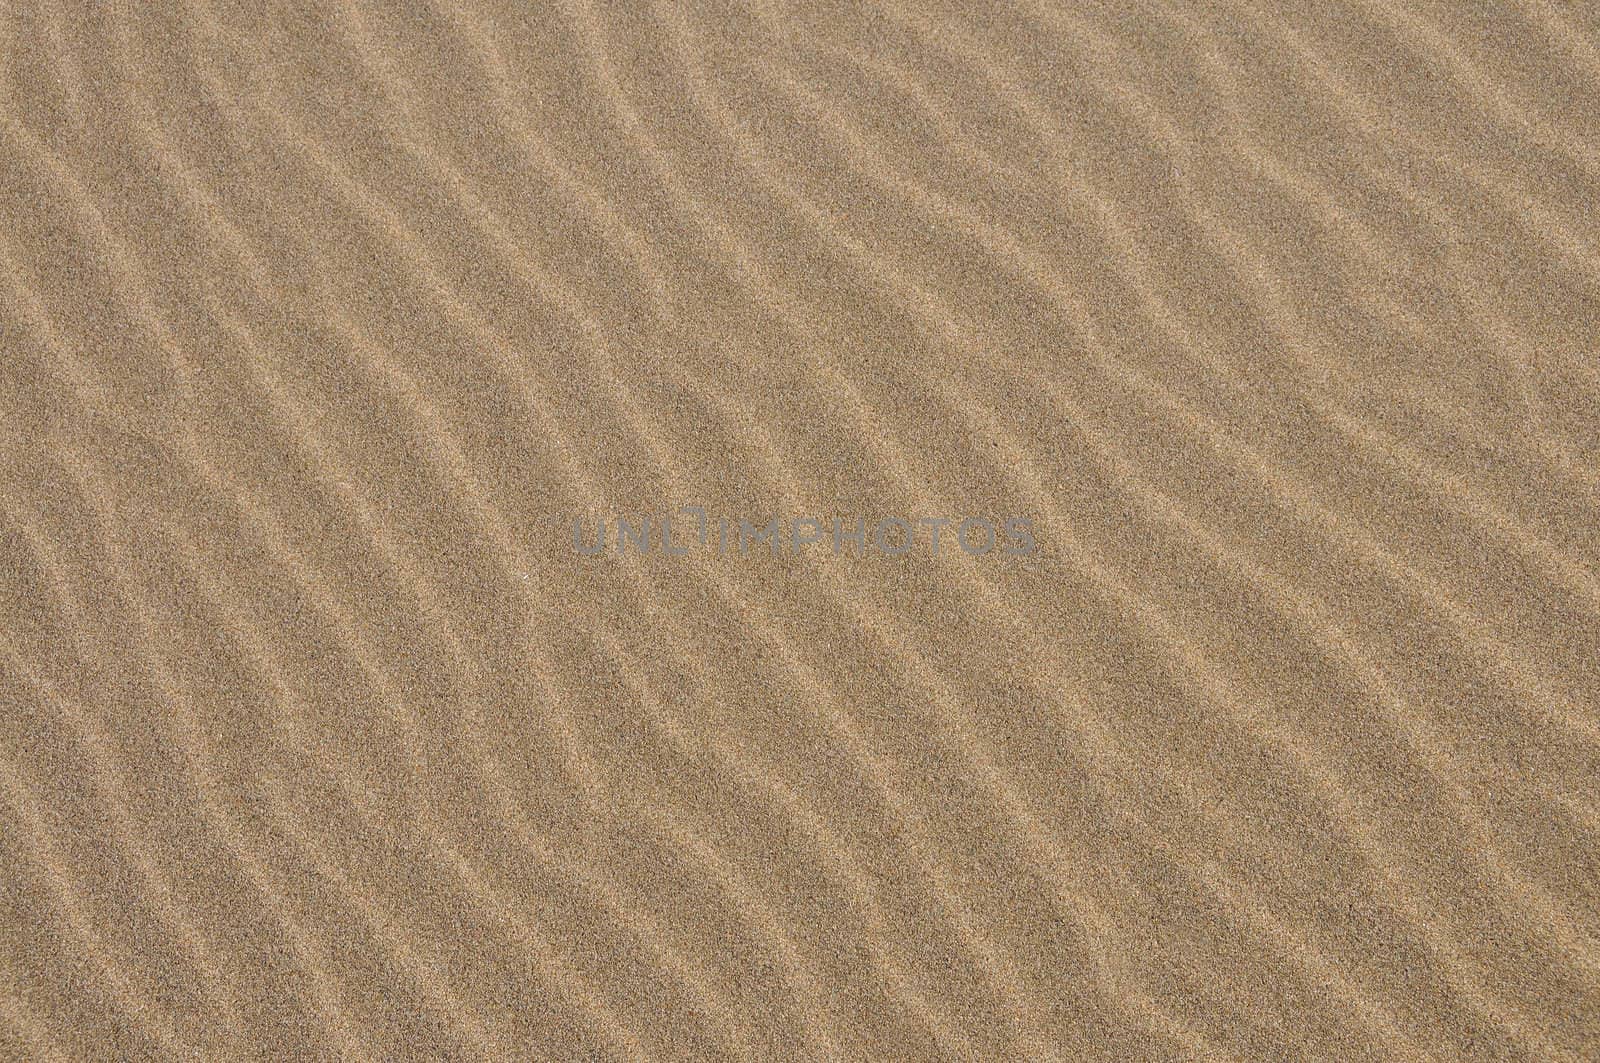 Sand pattern, interesting abstract texture